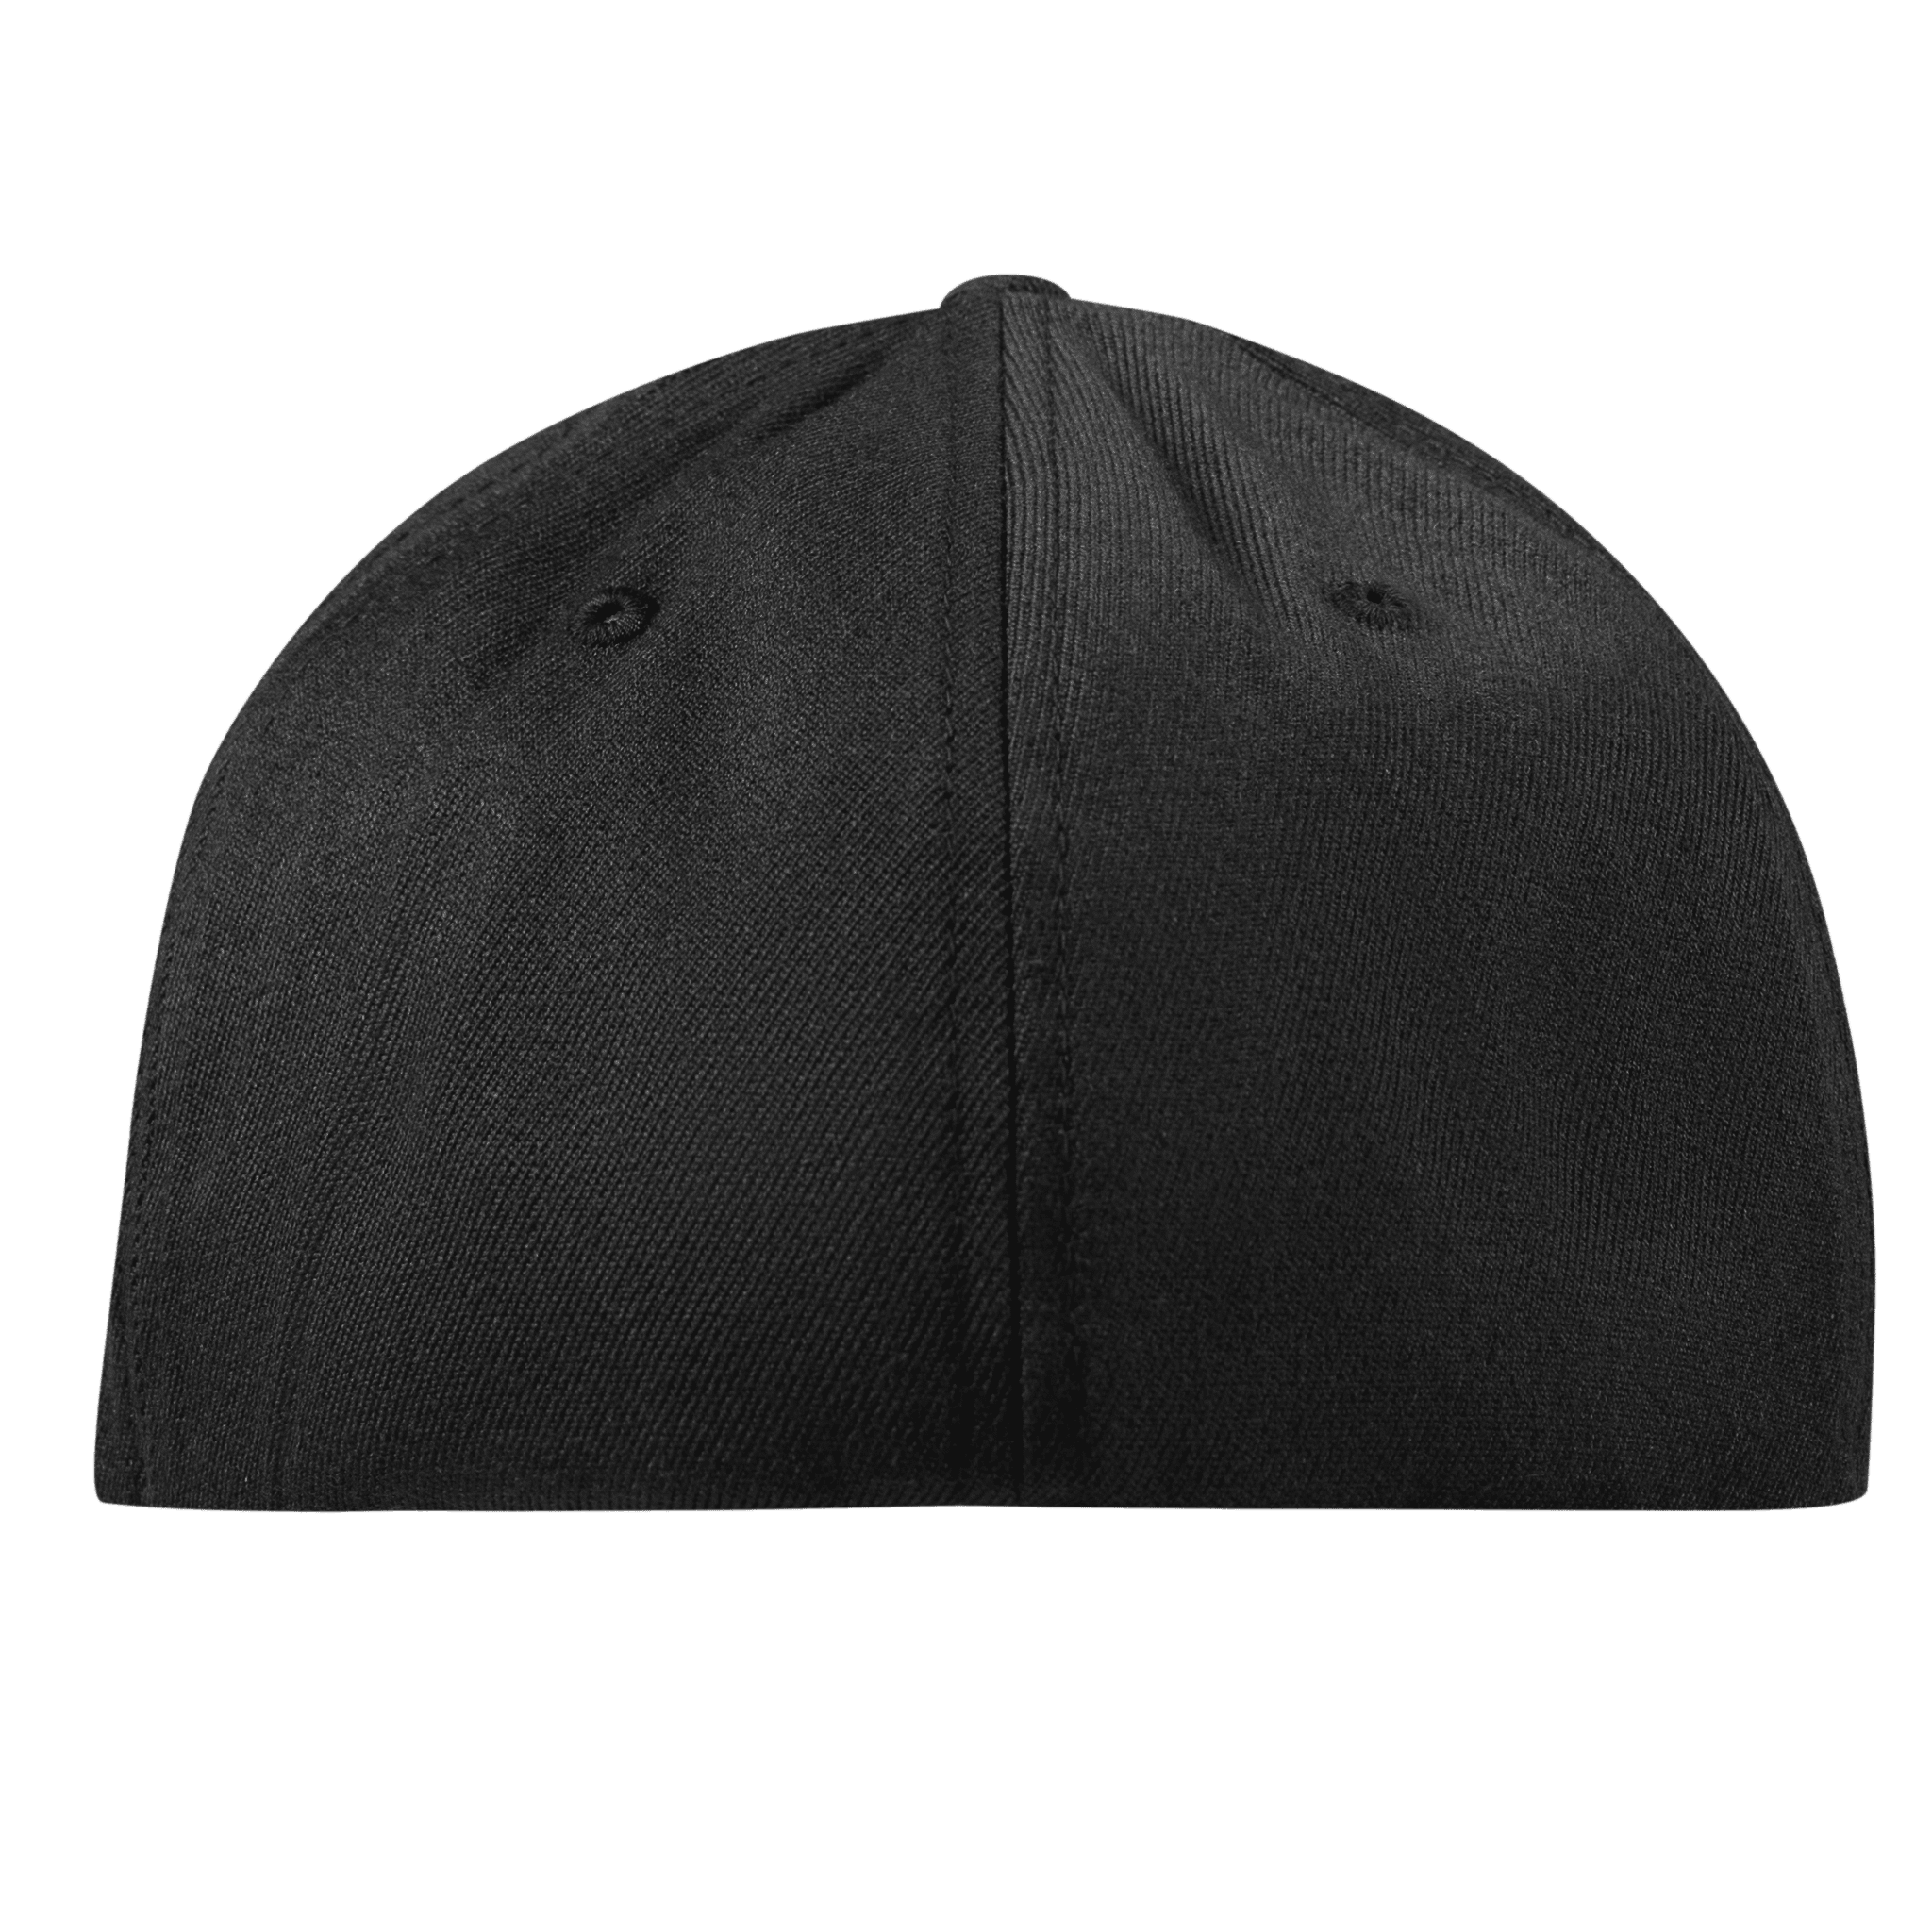 Wyoming 44 Flexfit Fitted Back Black